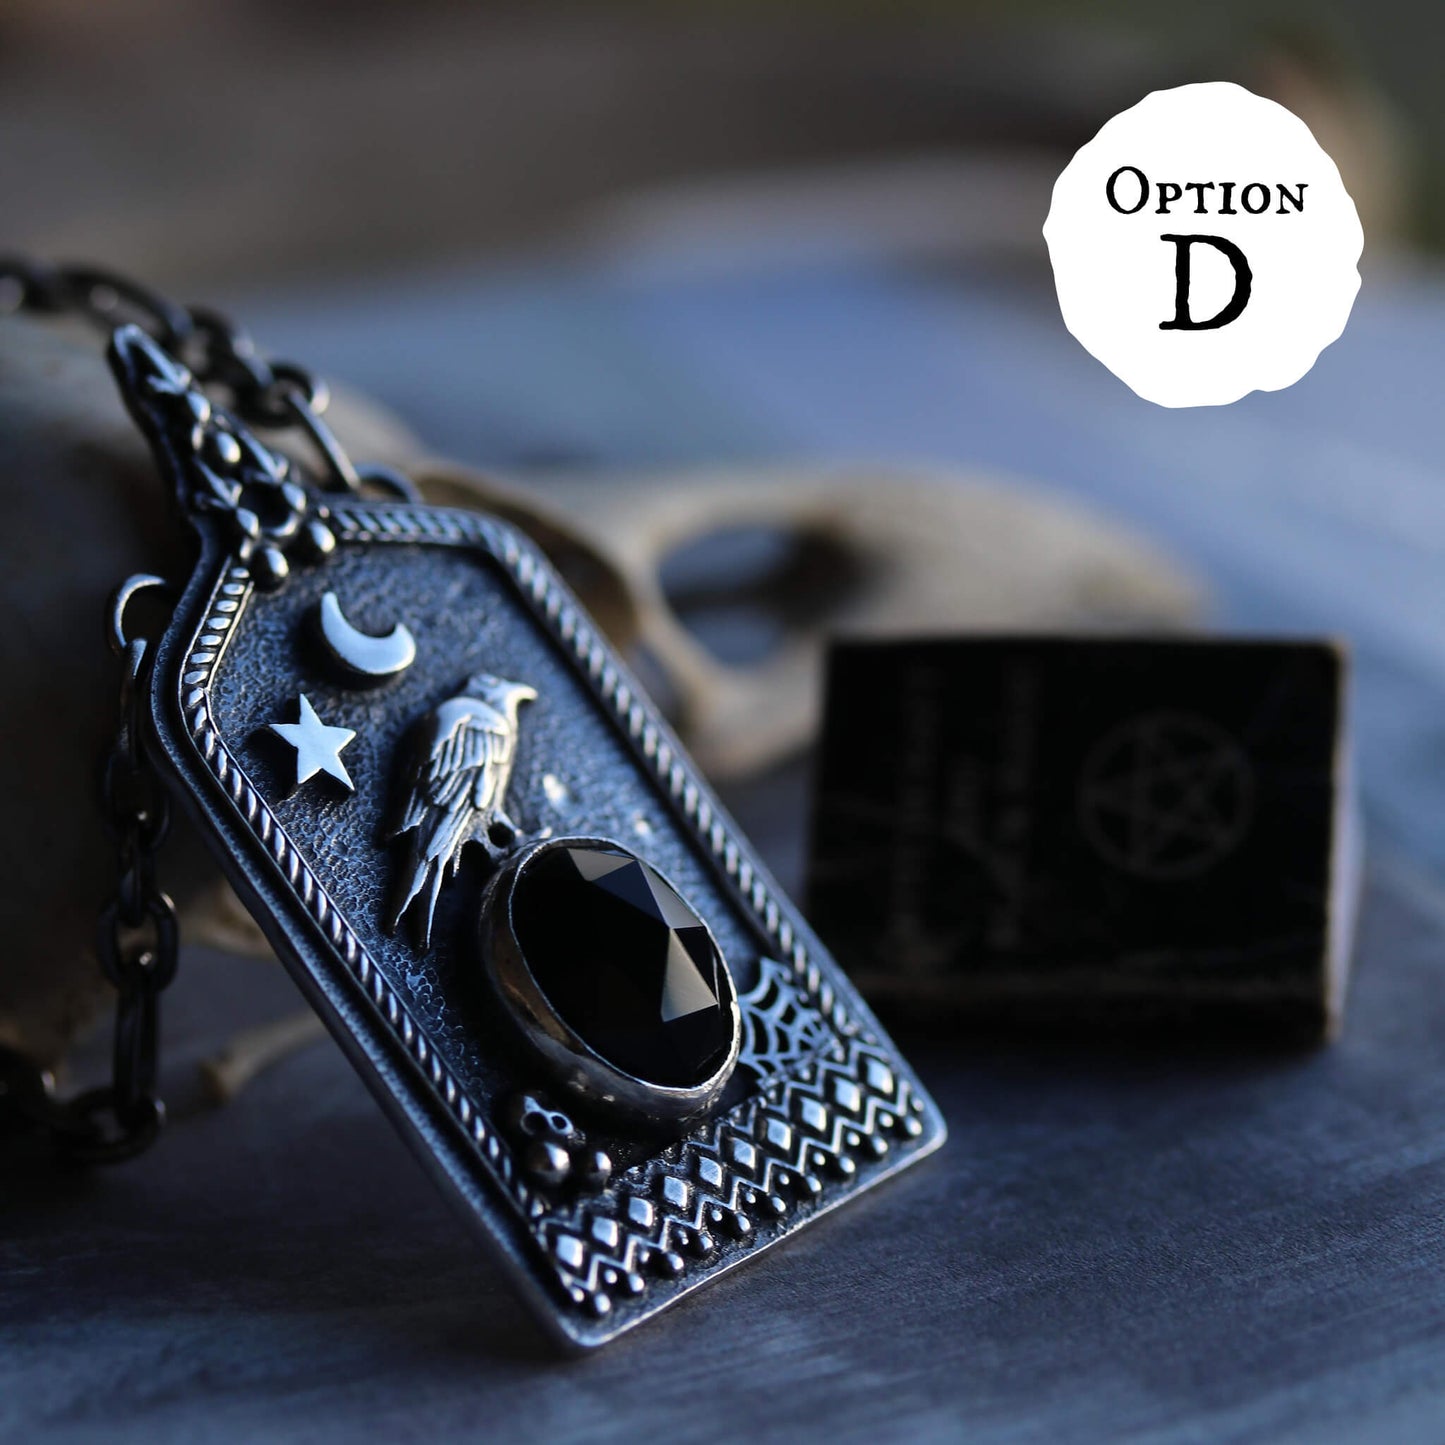 The Window to Midwinter - Onyx Necklace